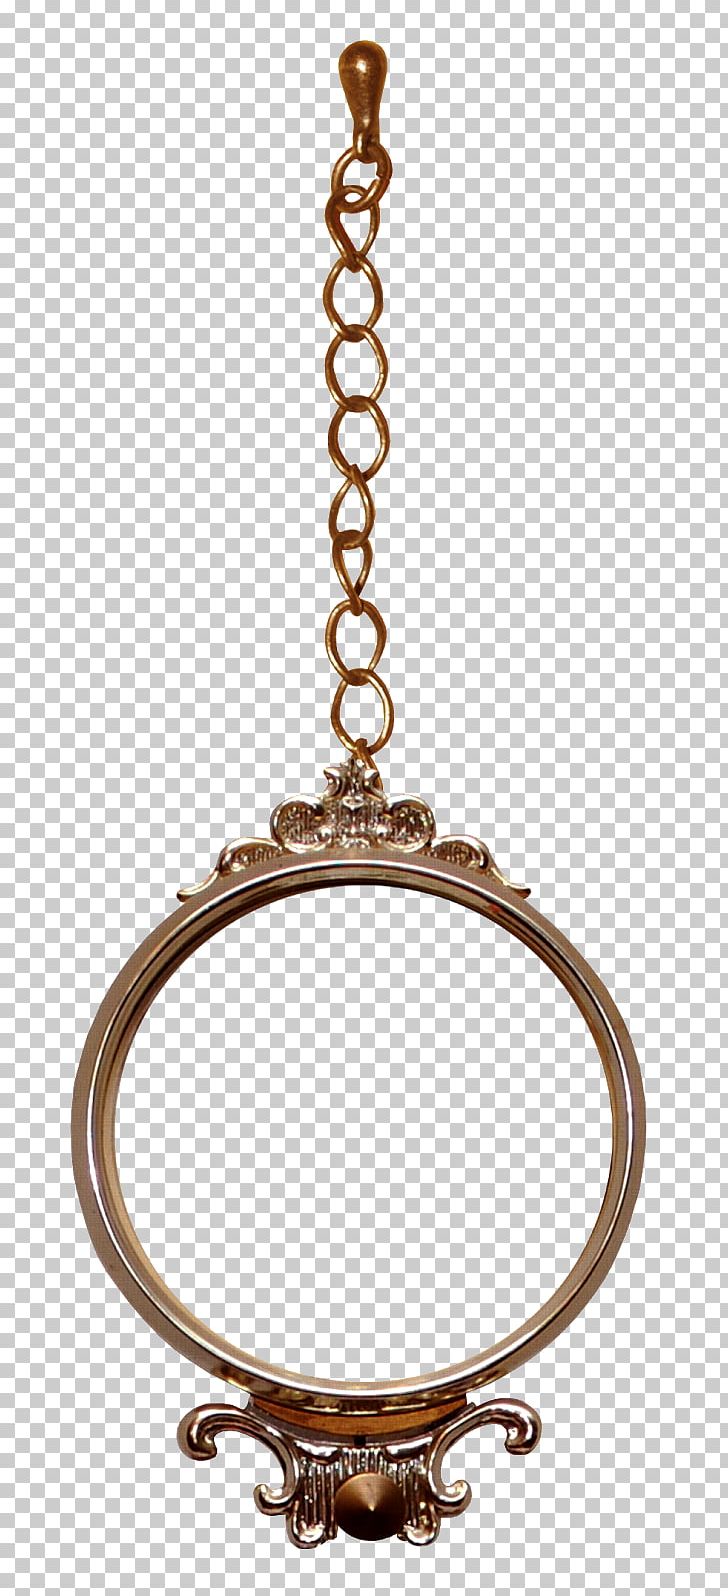 Charms & Pendants Gold Ring Portable Network Graphics Necklace PNG, Clipart, Body Jewelry, Charms Pendants, Gold, Gold Medal, Jewellery Free PNG Download